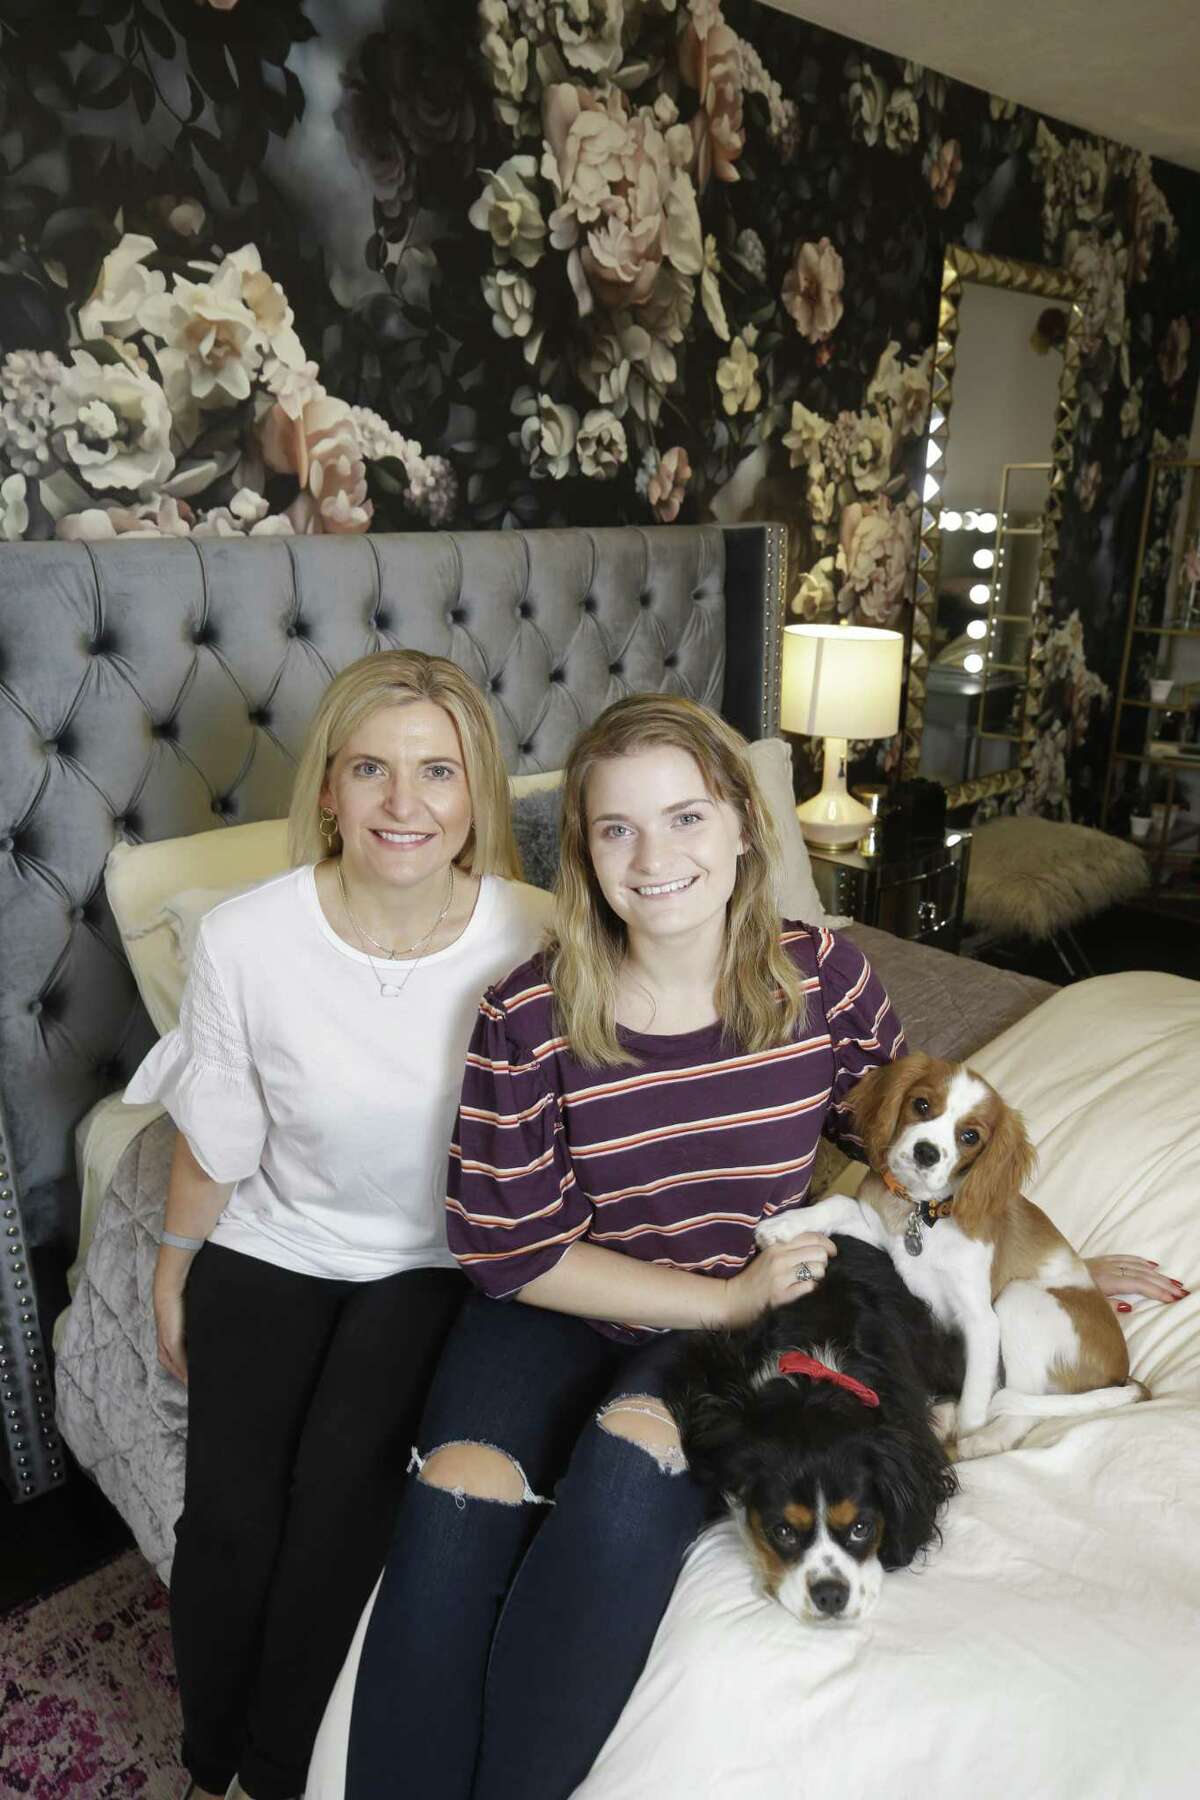 Houston interior designer Rainey Richardson designed a room for Brooke Kotrla, right, pictured with her mother Deanna Kotrla, and her dogs, Reggie and Bennett. Richardson wanted to give back to the community, she works through Texas Children's Hospital to improve the bedroom environments of the chronically ill.